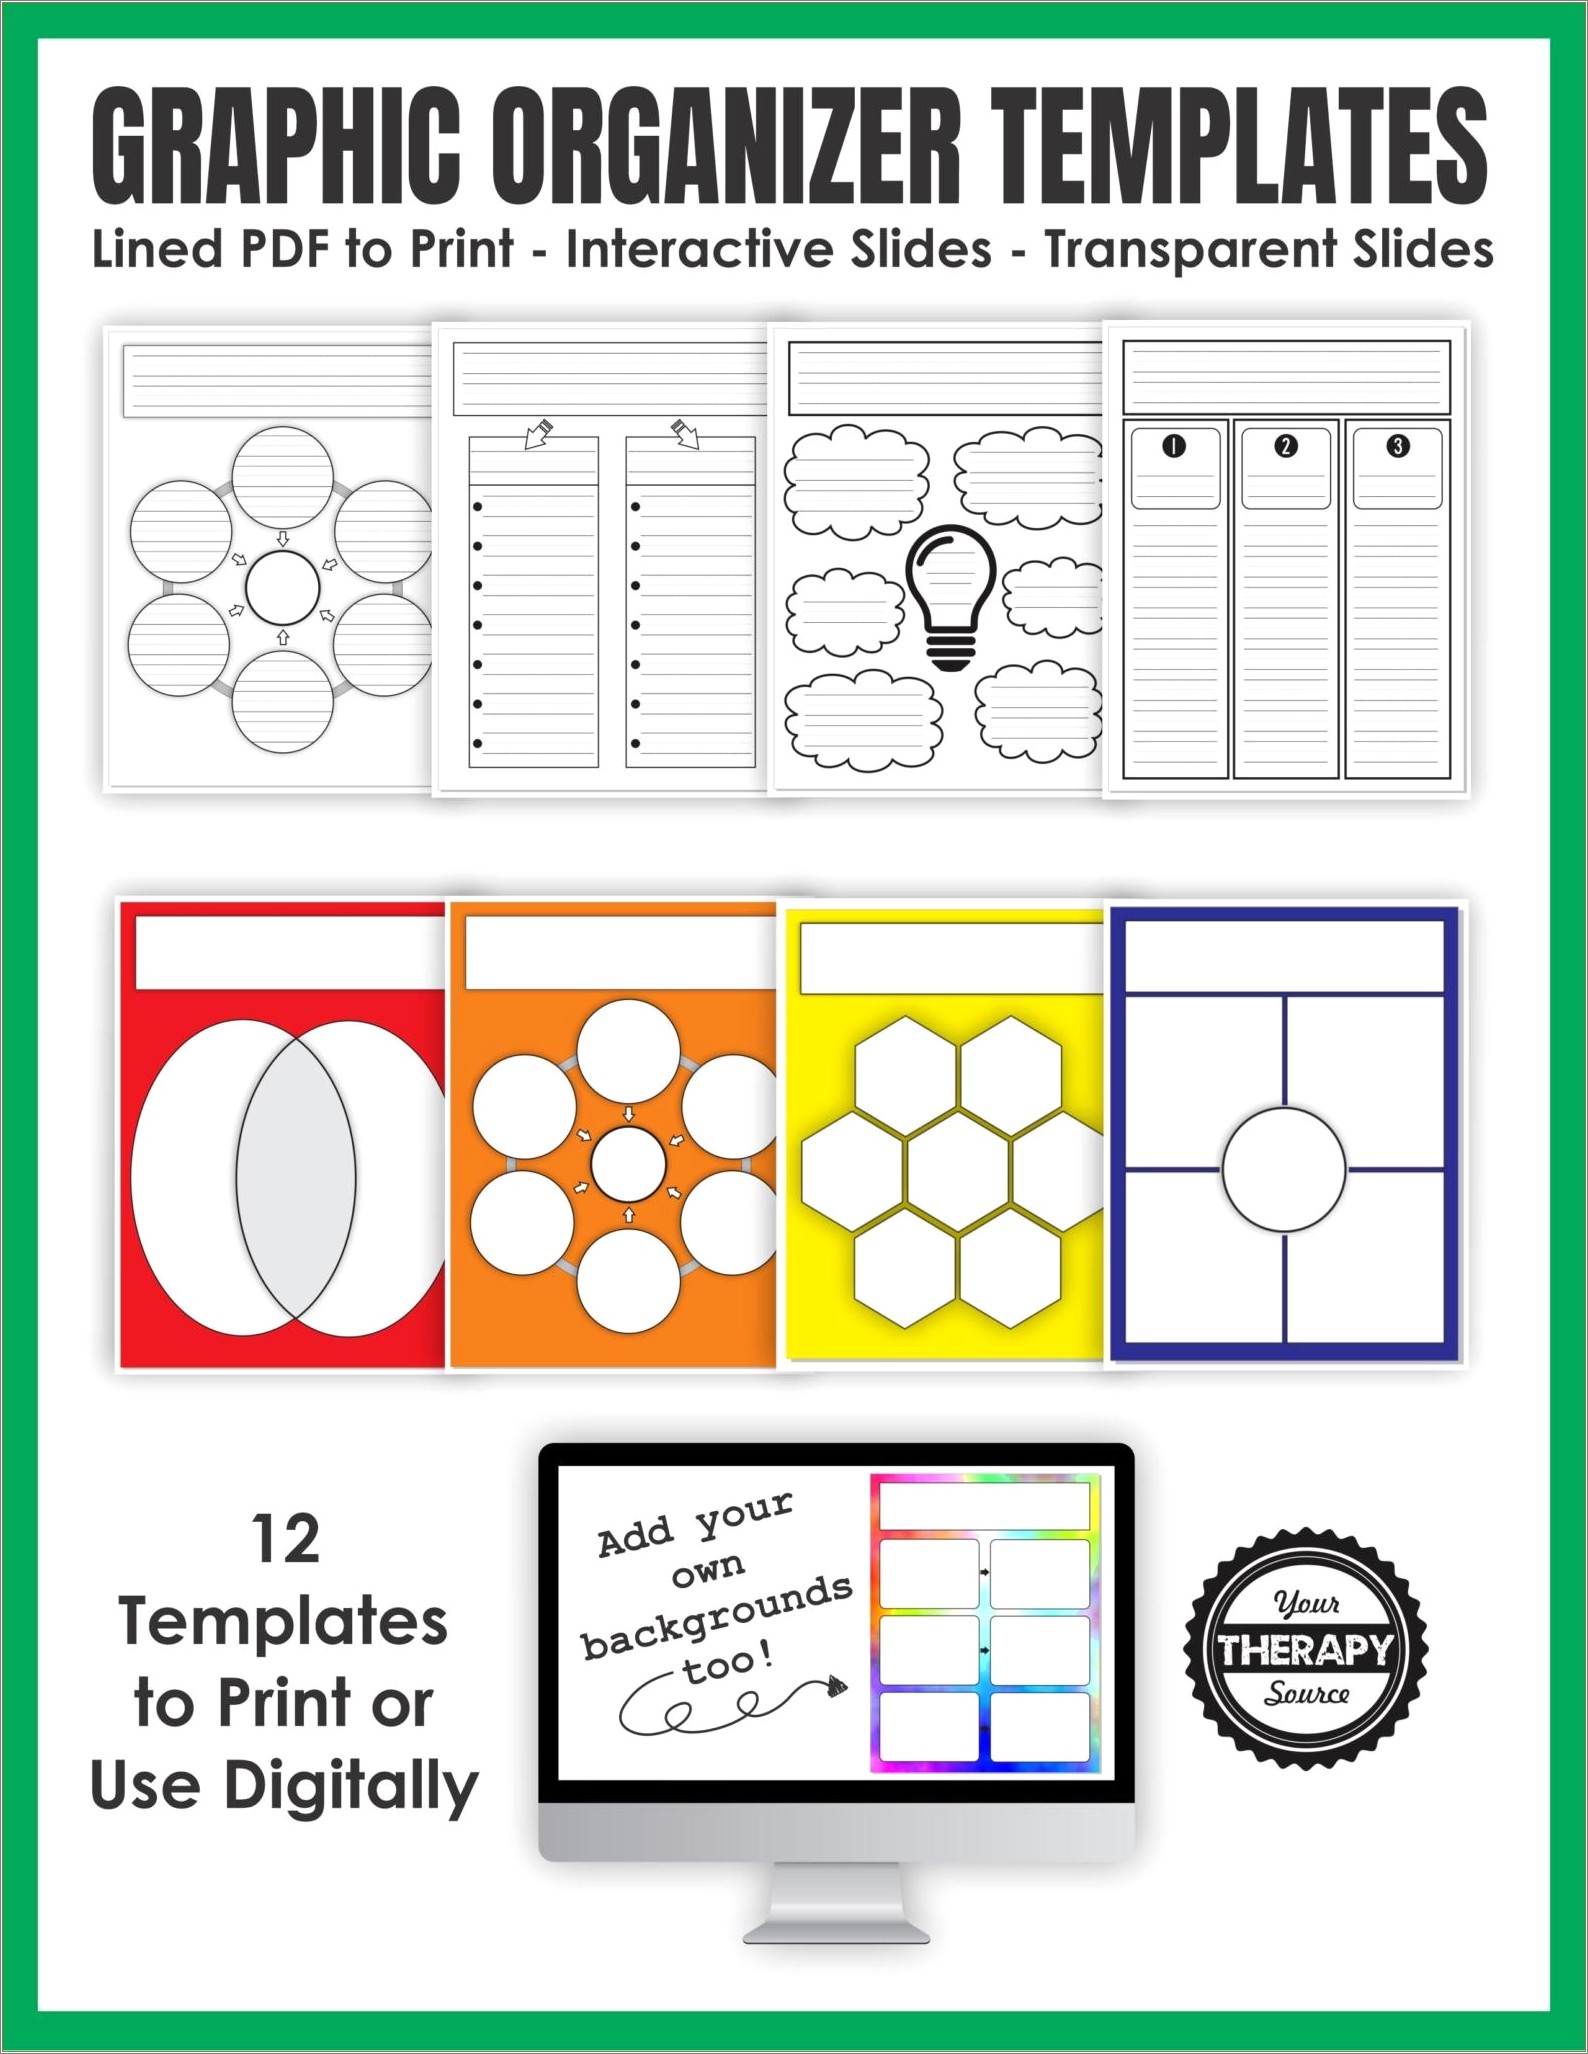 Free Graphic Organizer Template For Research